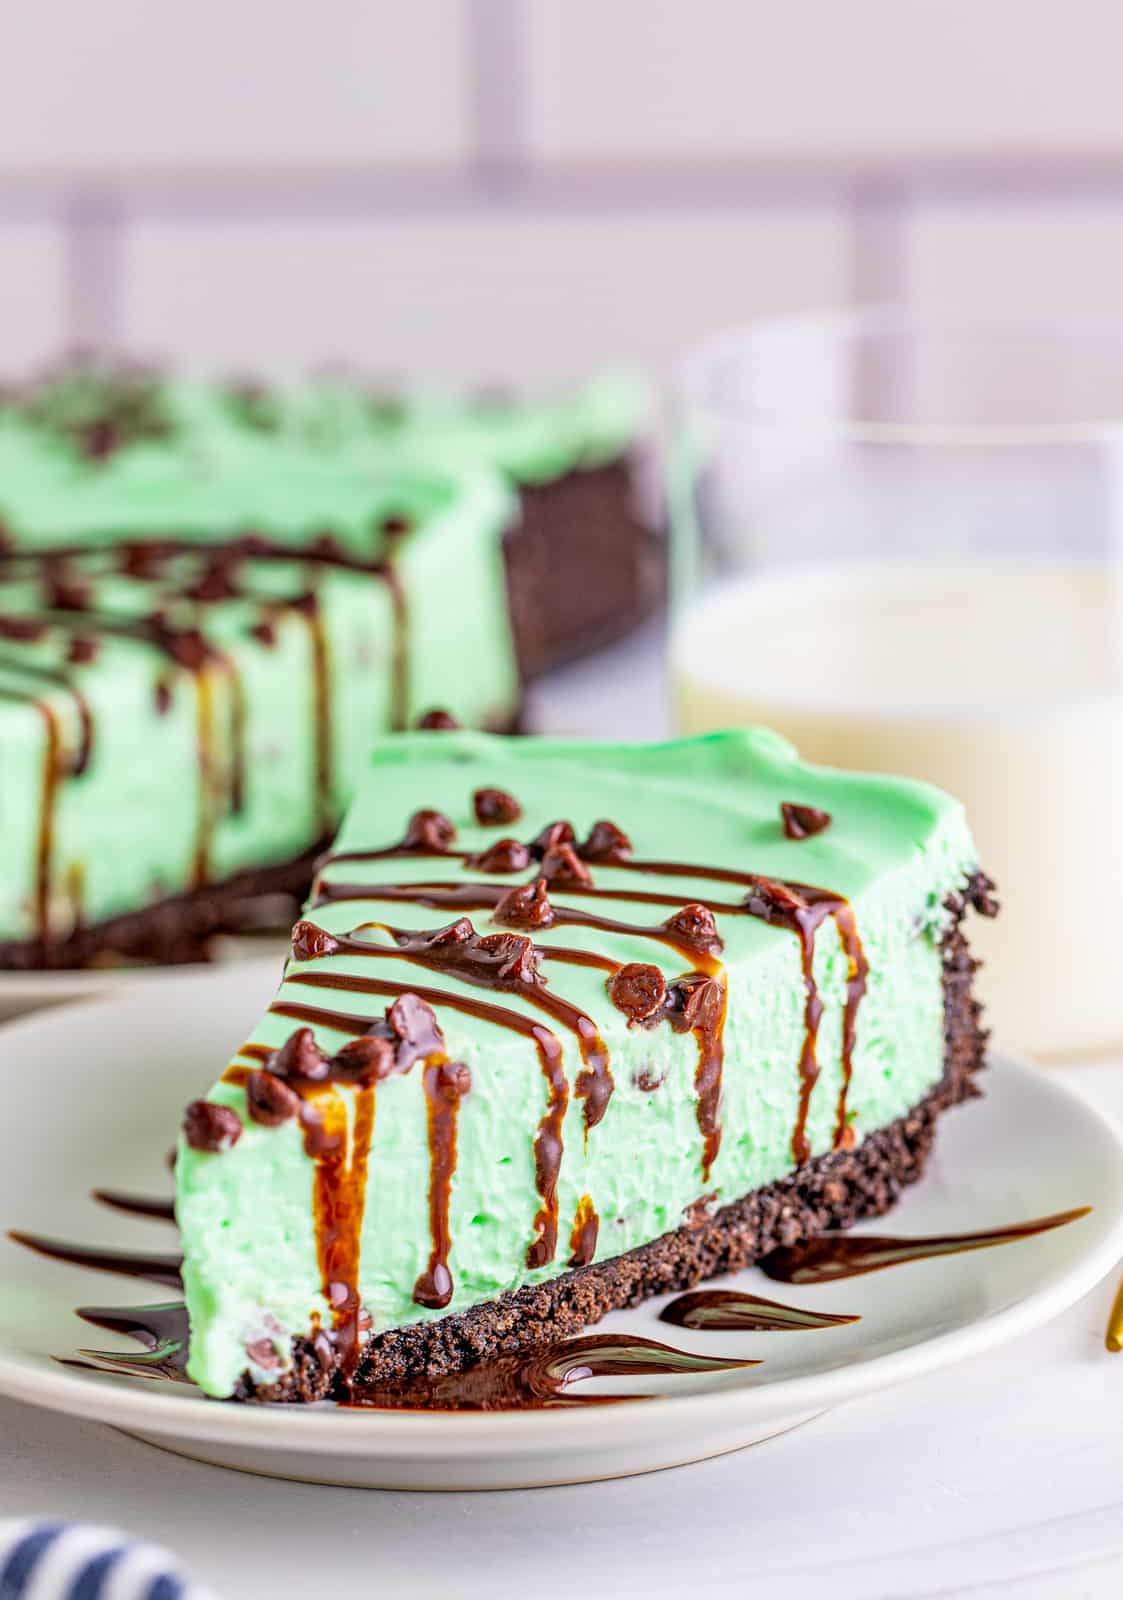 Slice of Mint Chocolate Cheesecake topped with chocolate chips and syrup on white plate.